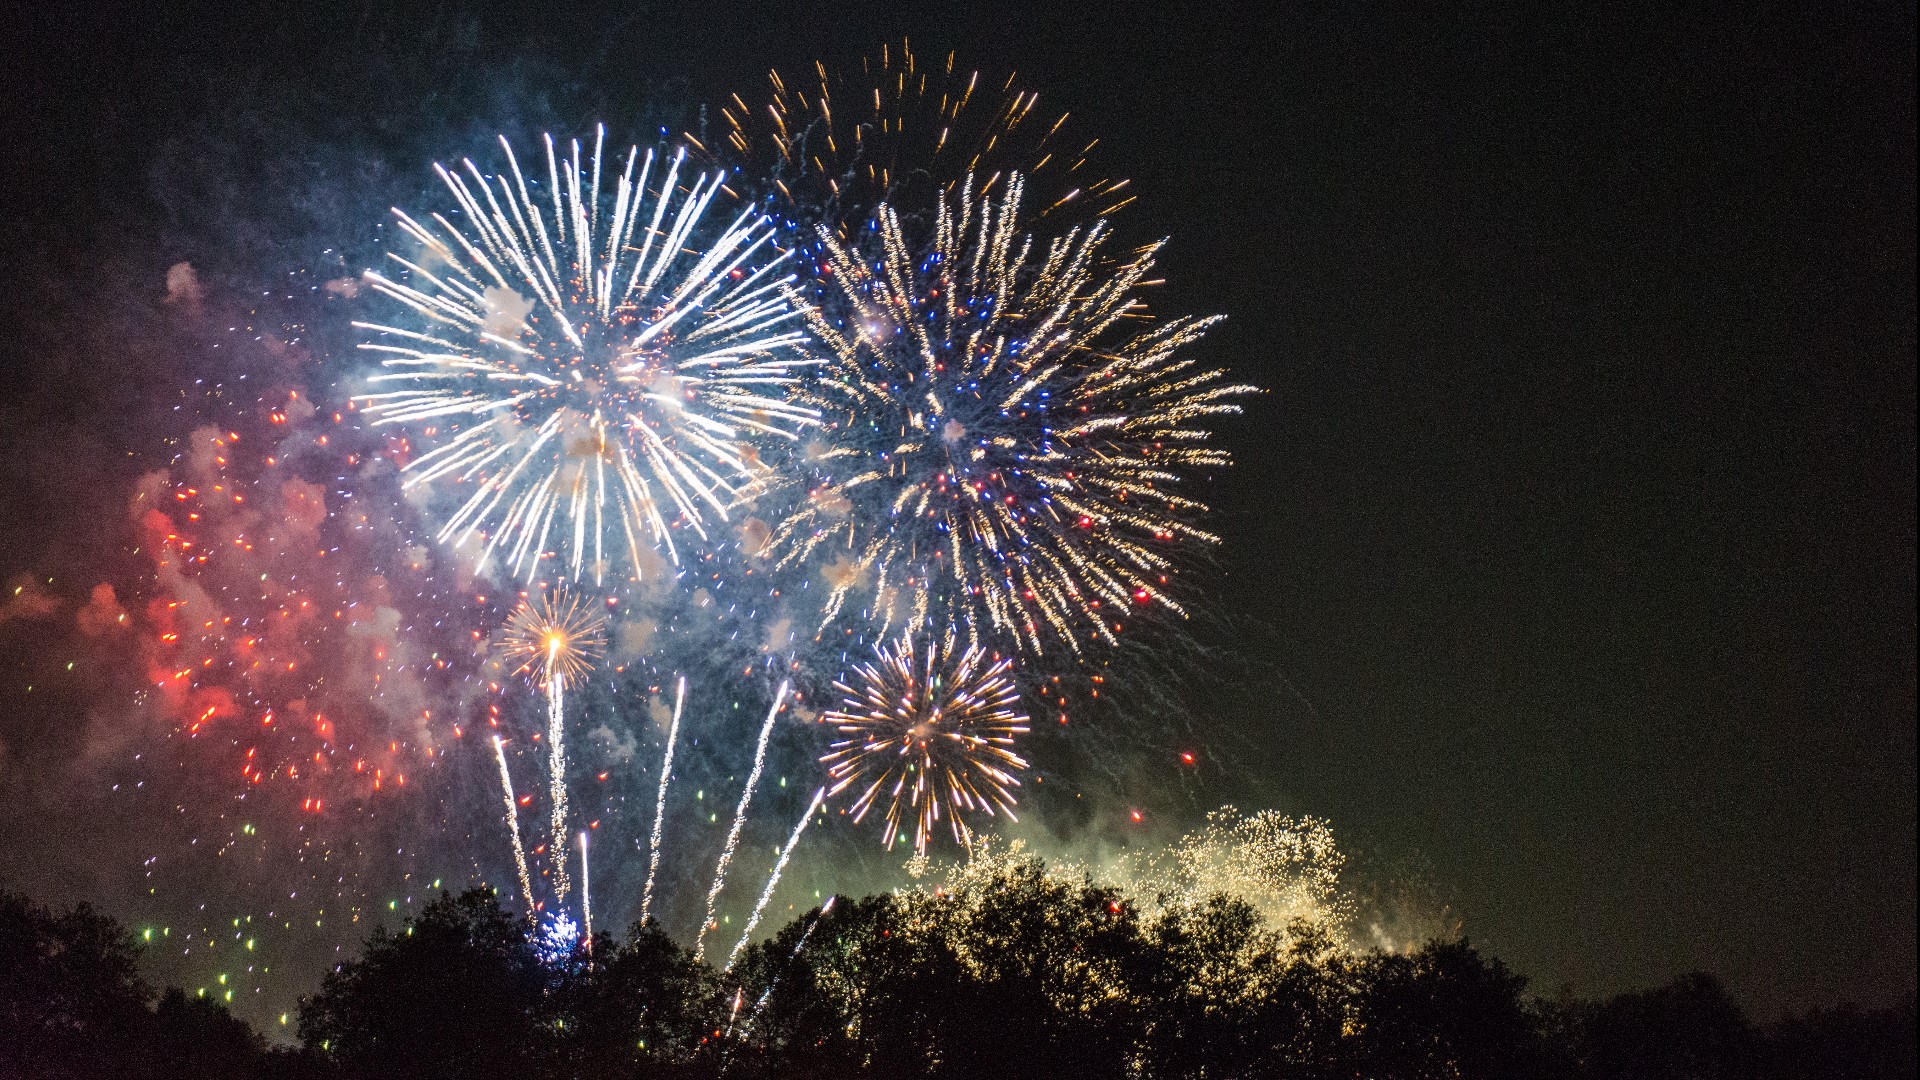 The humidity and other factors can impact if fireworks are bright and beautiful or if they can be a bit dull.